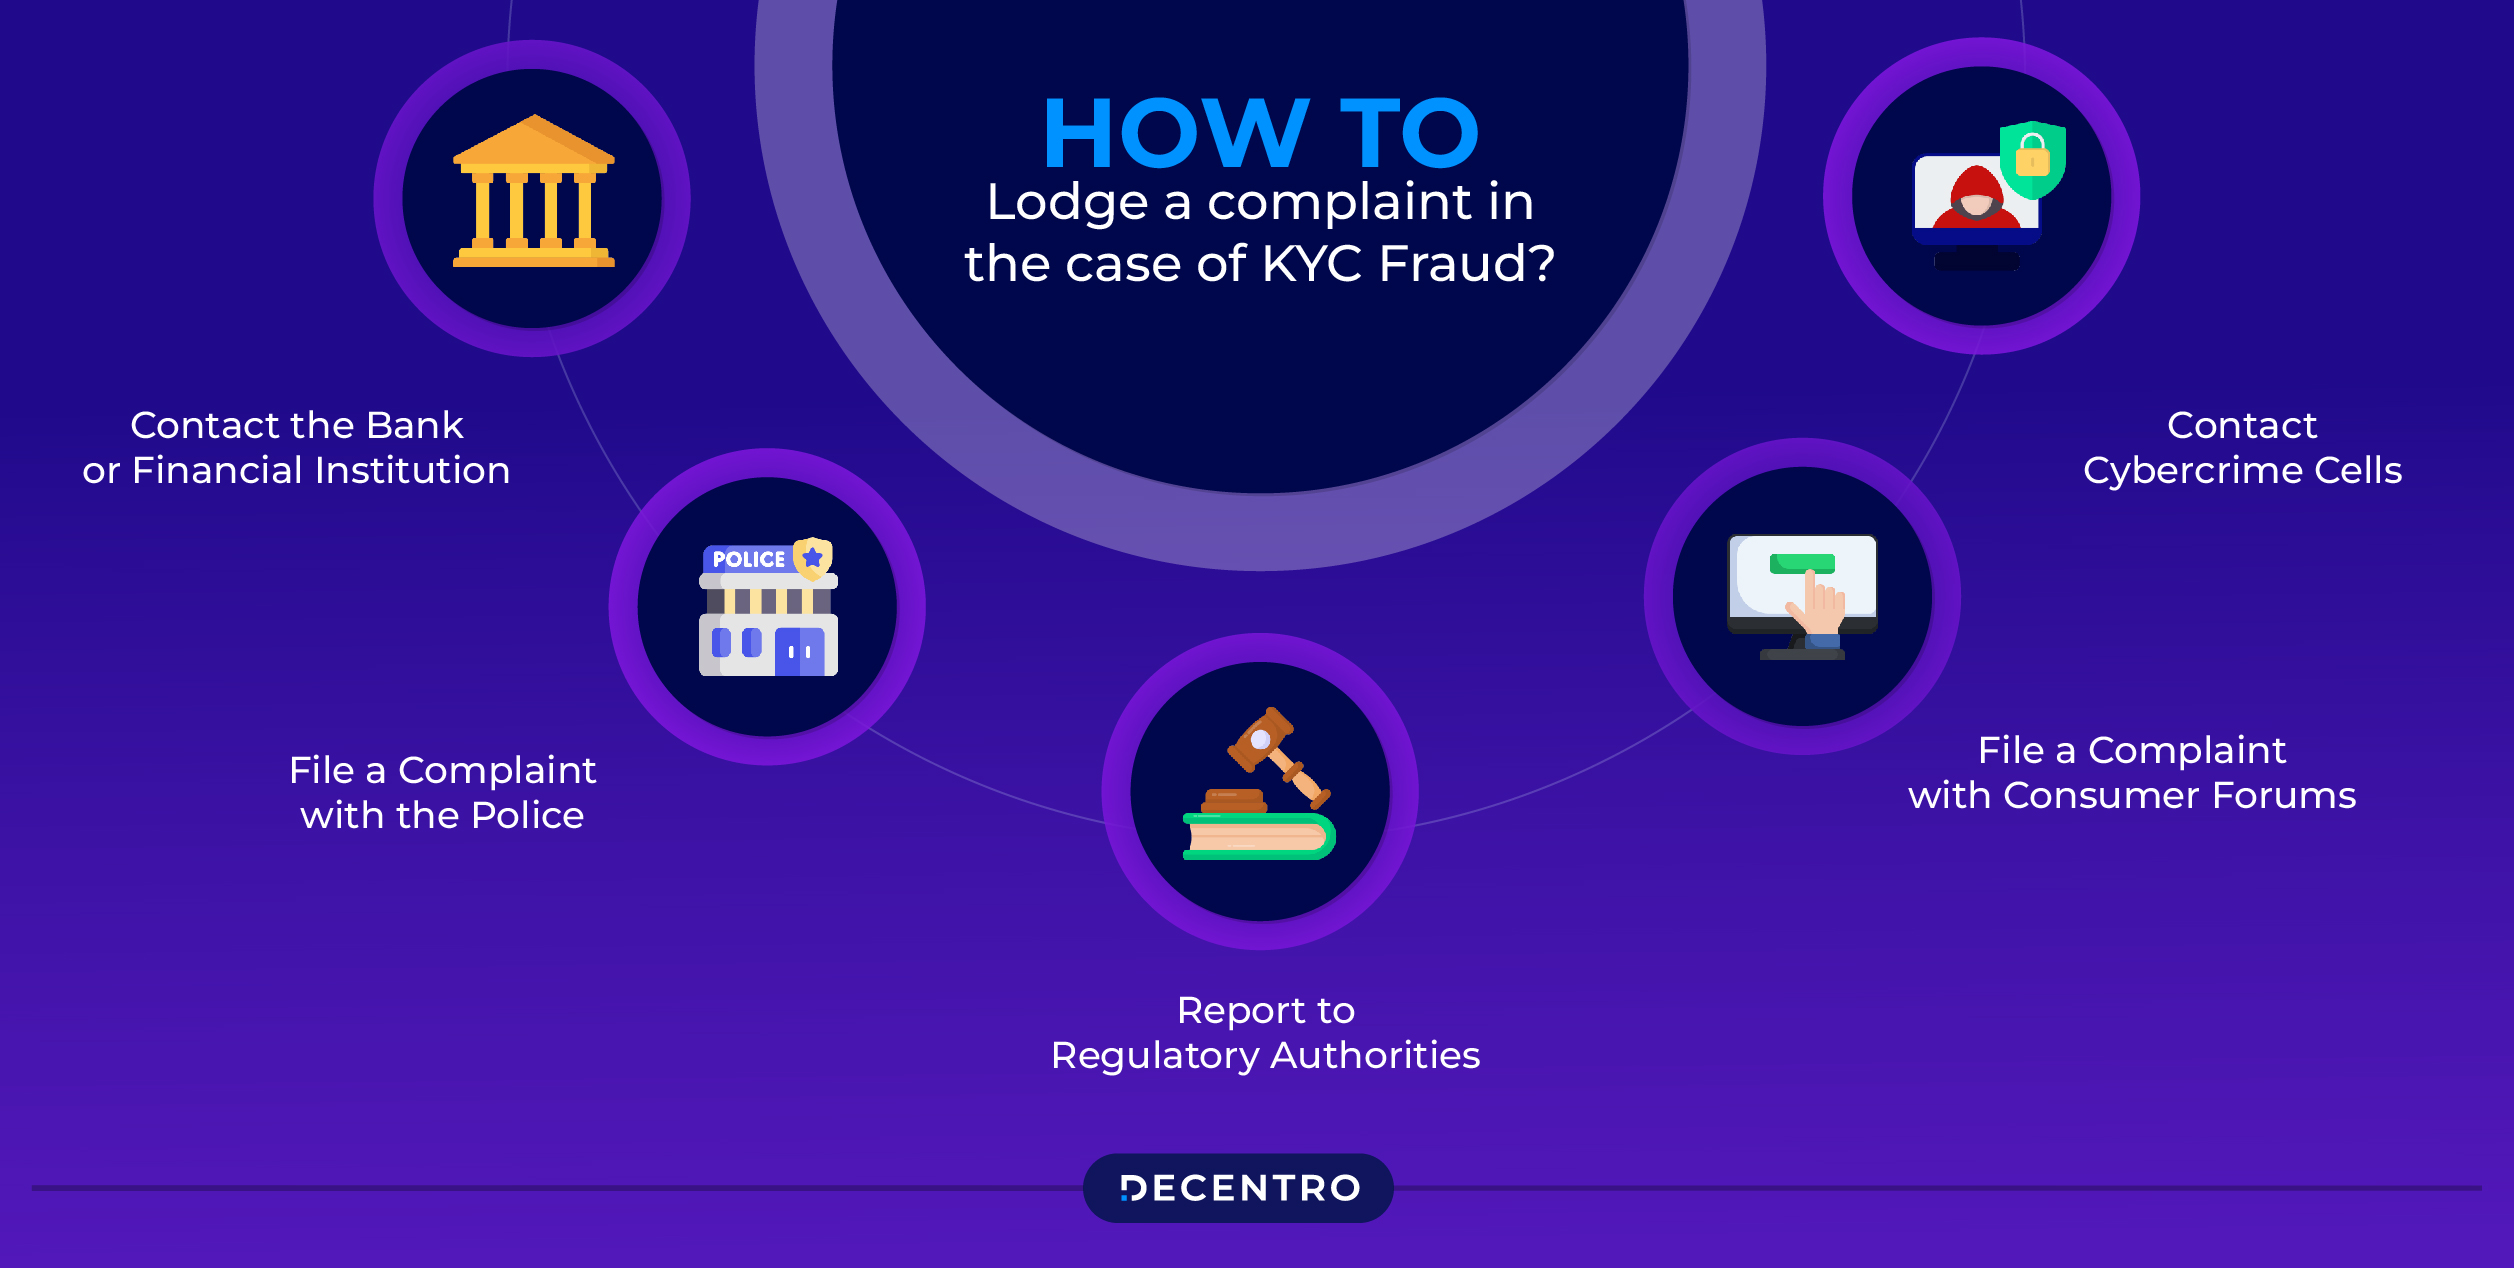 How to lodge a complaint in the case of KYC Fraud?